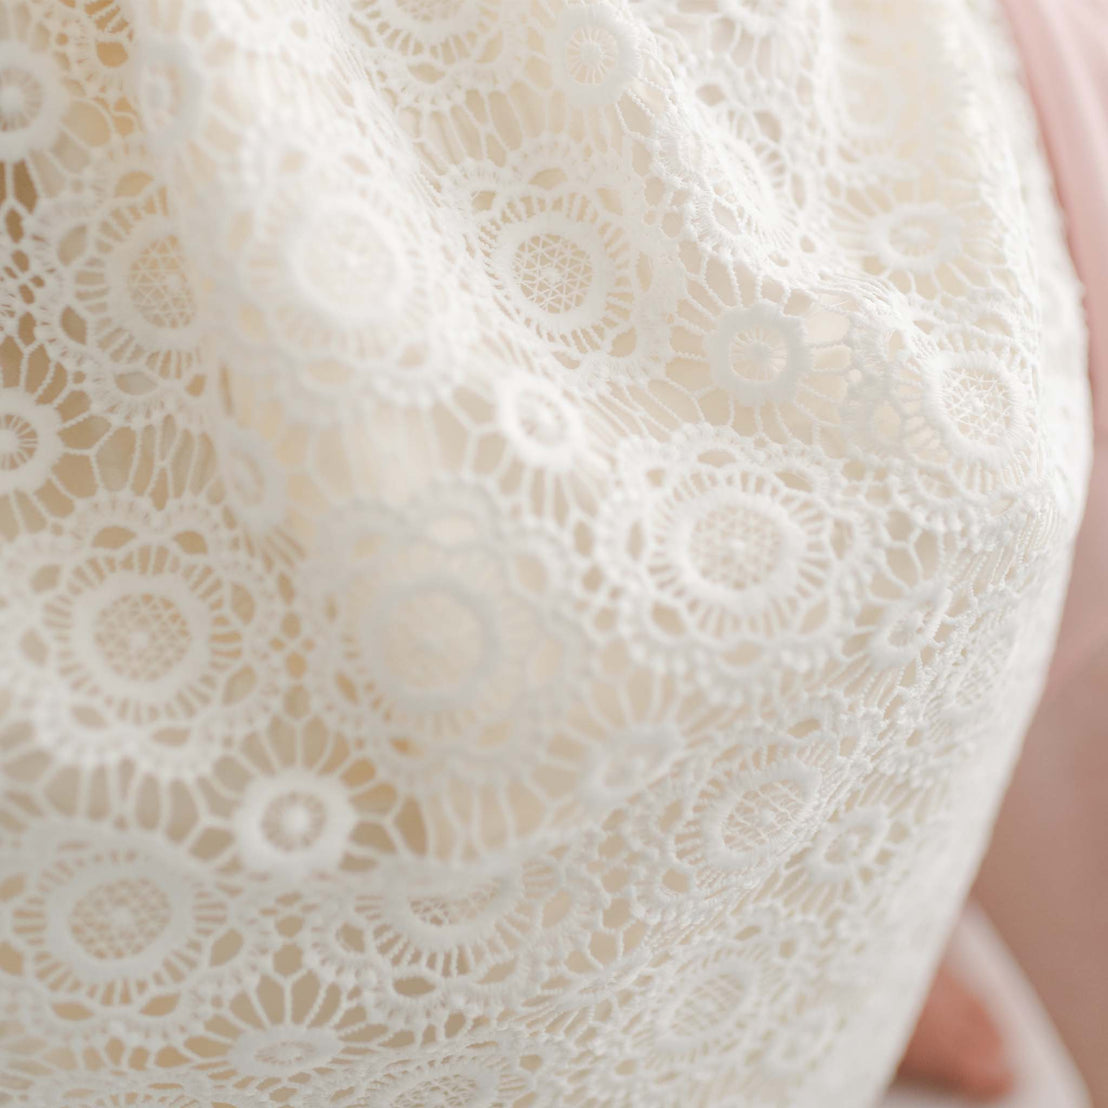 Close-up of a white lace fabric with intricate circular patterns, reminiscent of a delicate Poppy Christening Gown & Bonnet. The fabric, handmade in the USA, seems to be draped over a surface.